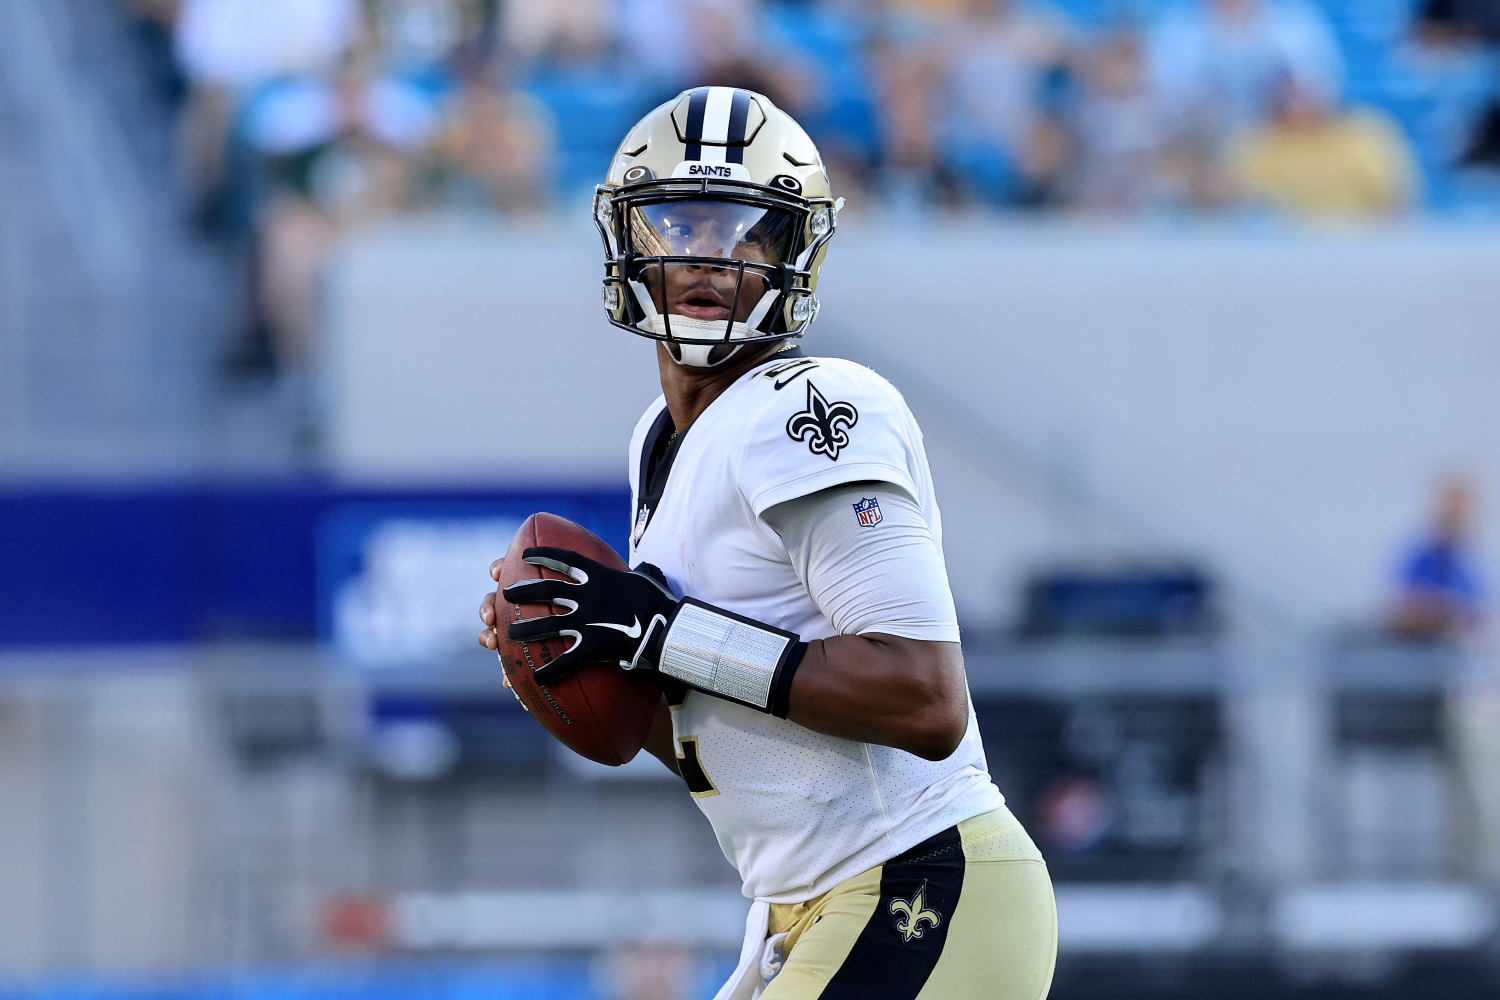 Jameis Winston Suddenly Has a Huge Obstacle to Overcome That Could Spoil His Sensational Start With the Saints